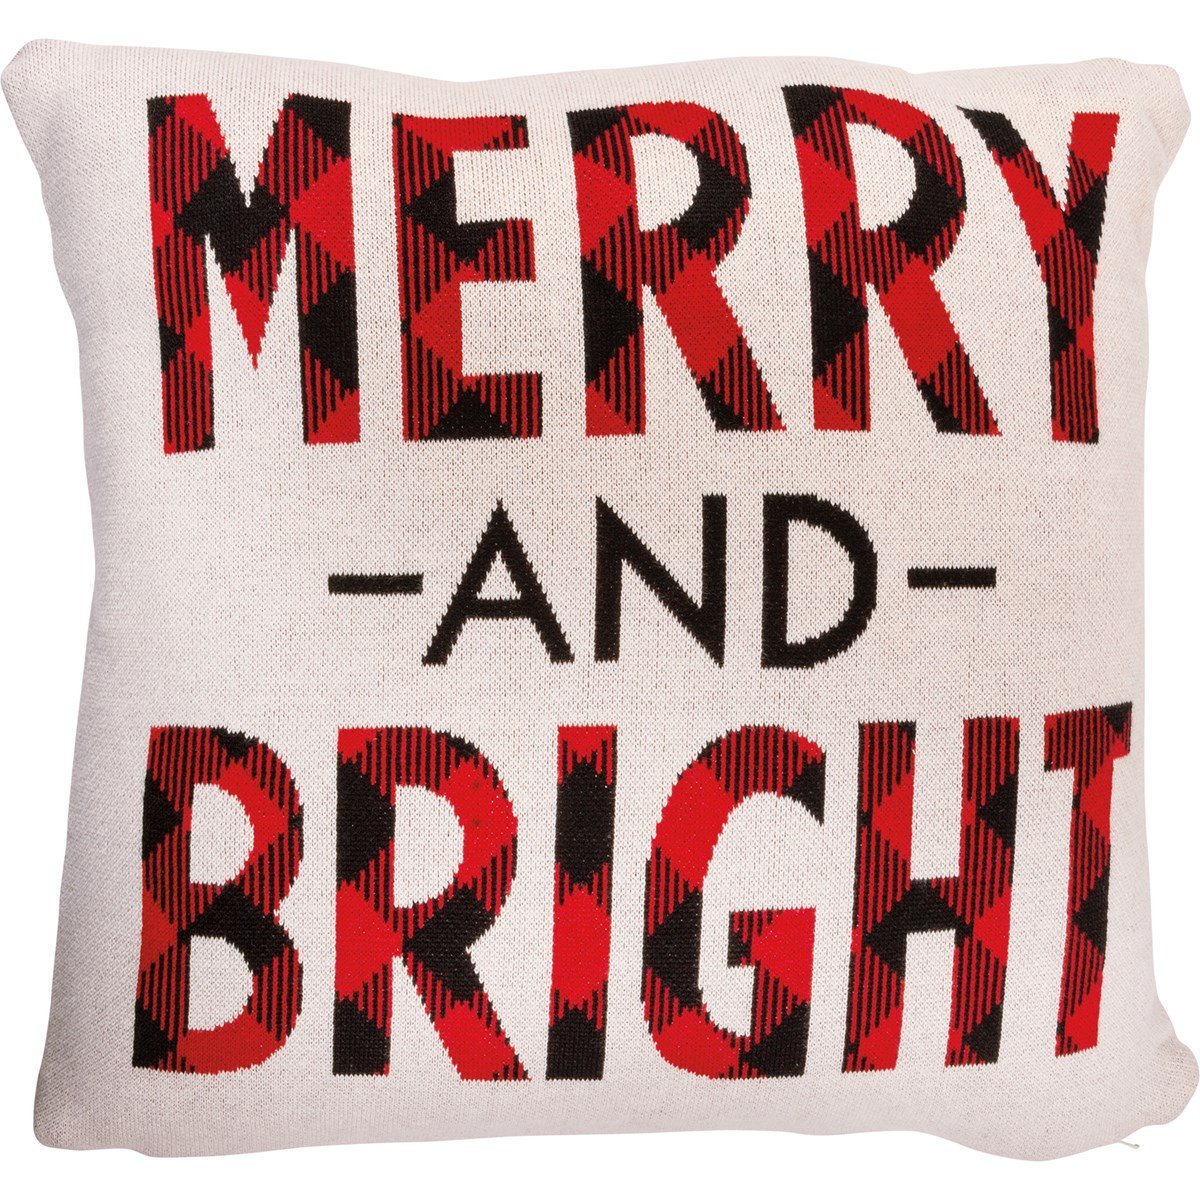 Knit Merry & Bright Pillow